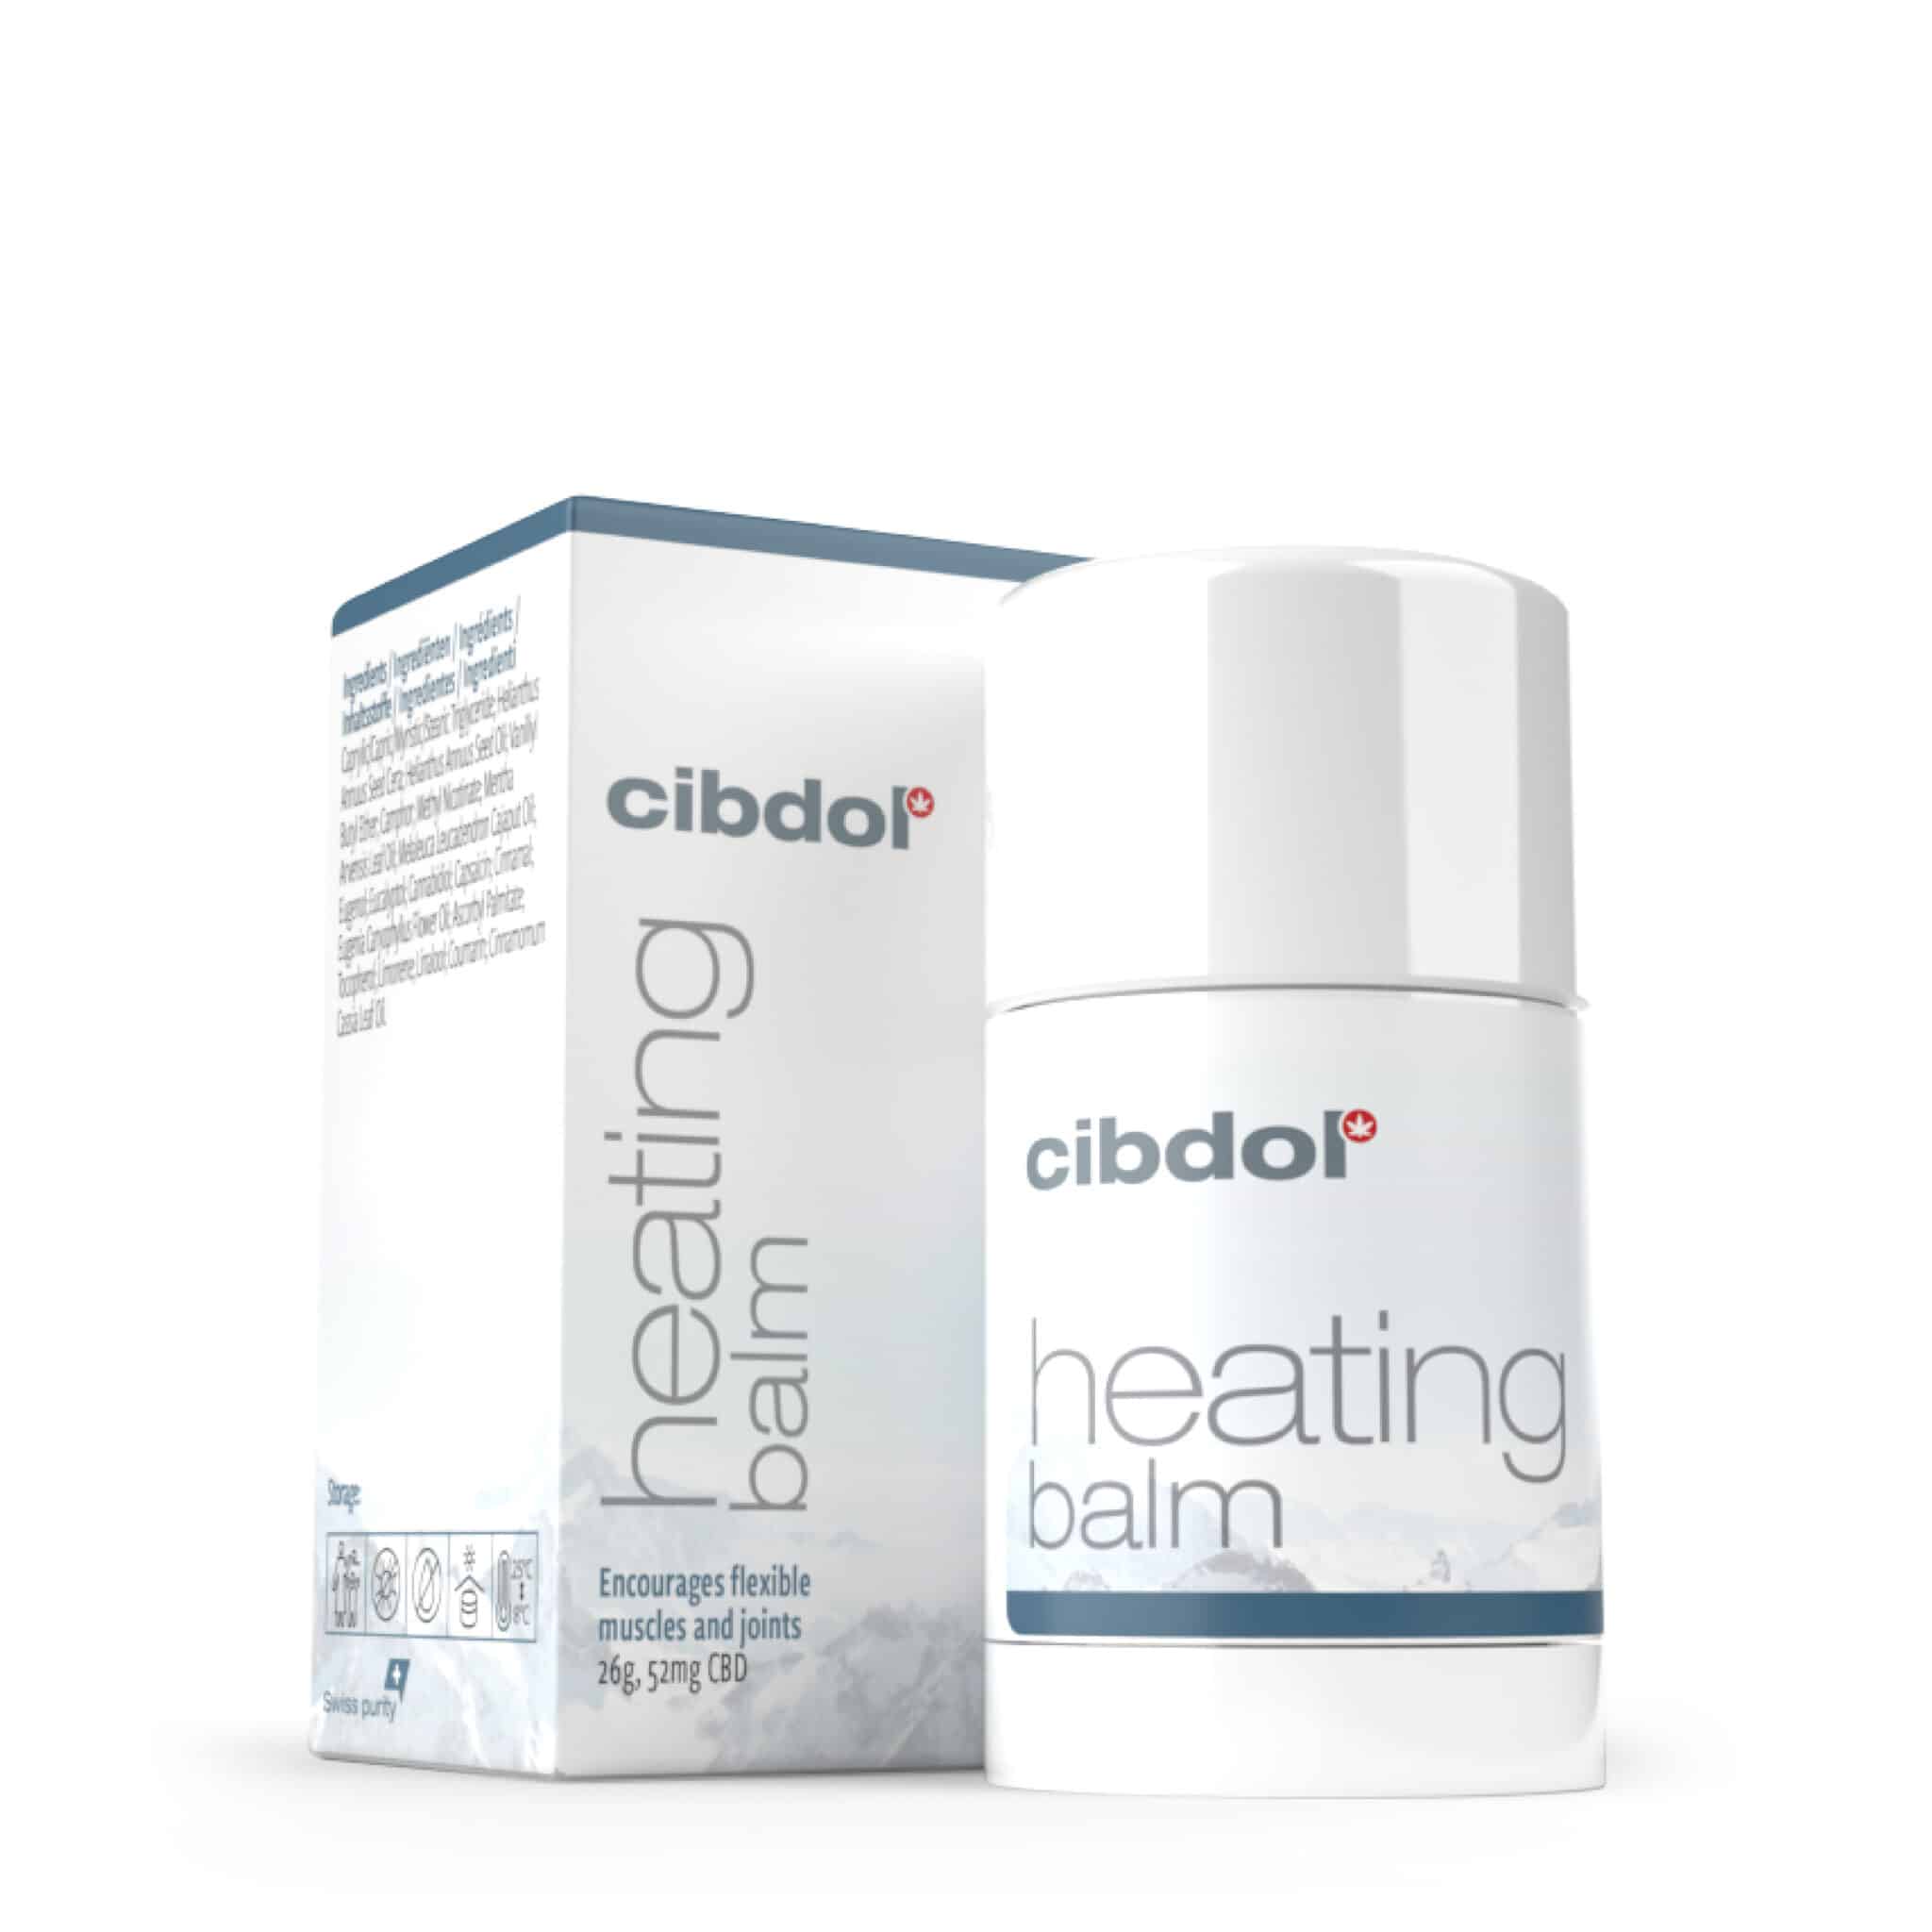 a Cibdol Heating Muscle Balm with CBD box and a Cibdol Heating Muscle Balm with CBD box with a white label on it.